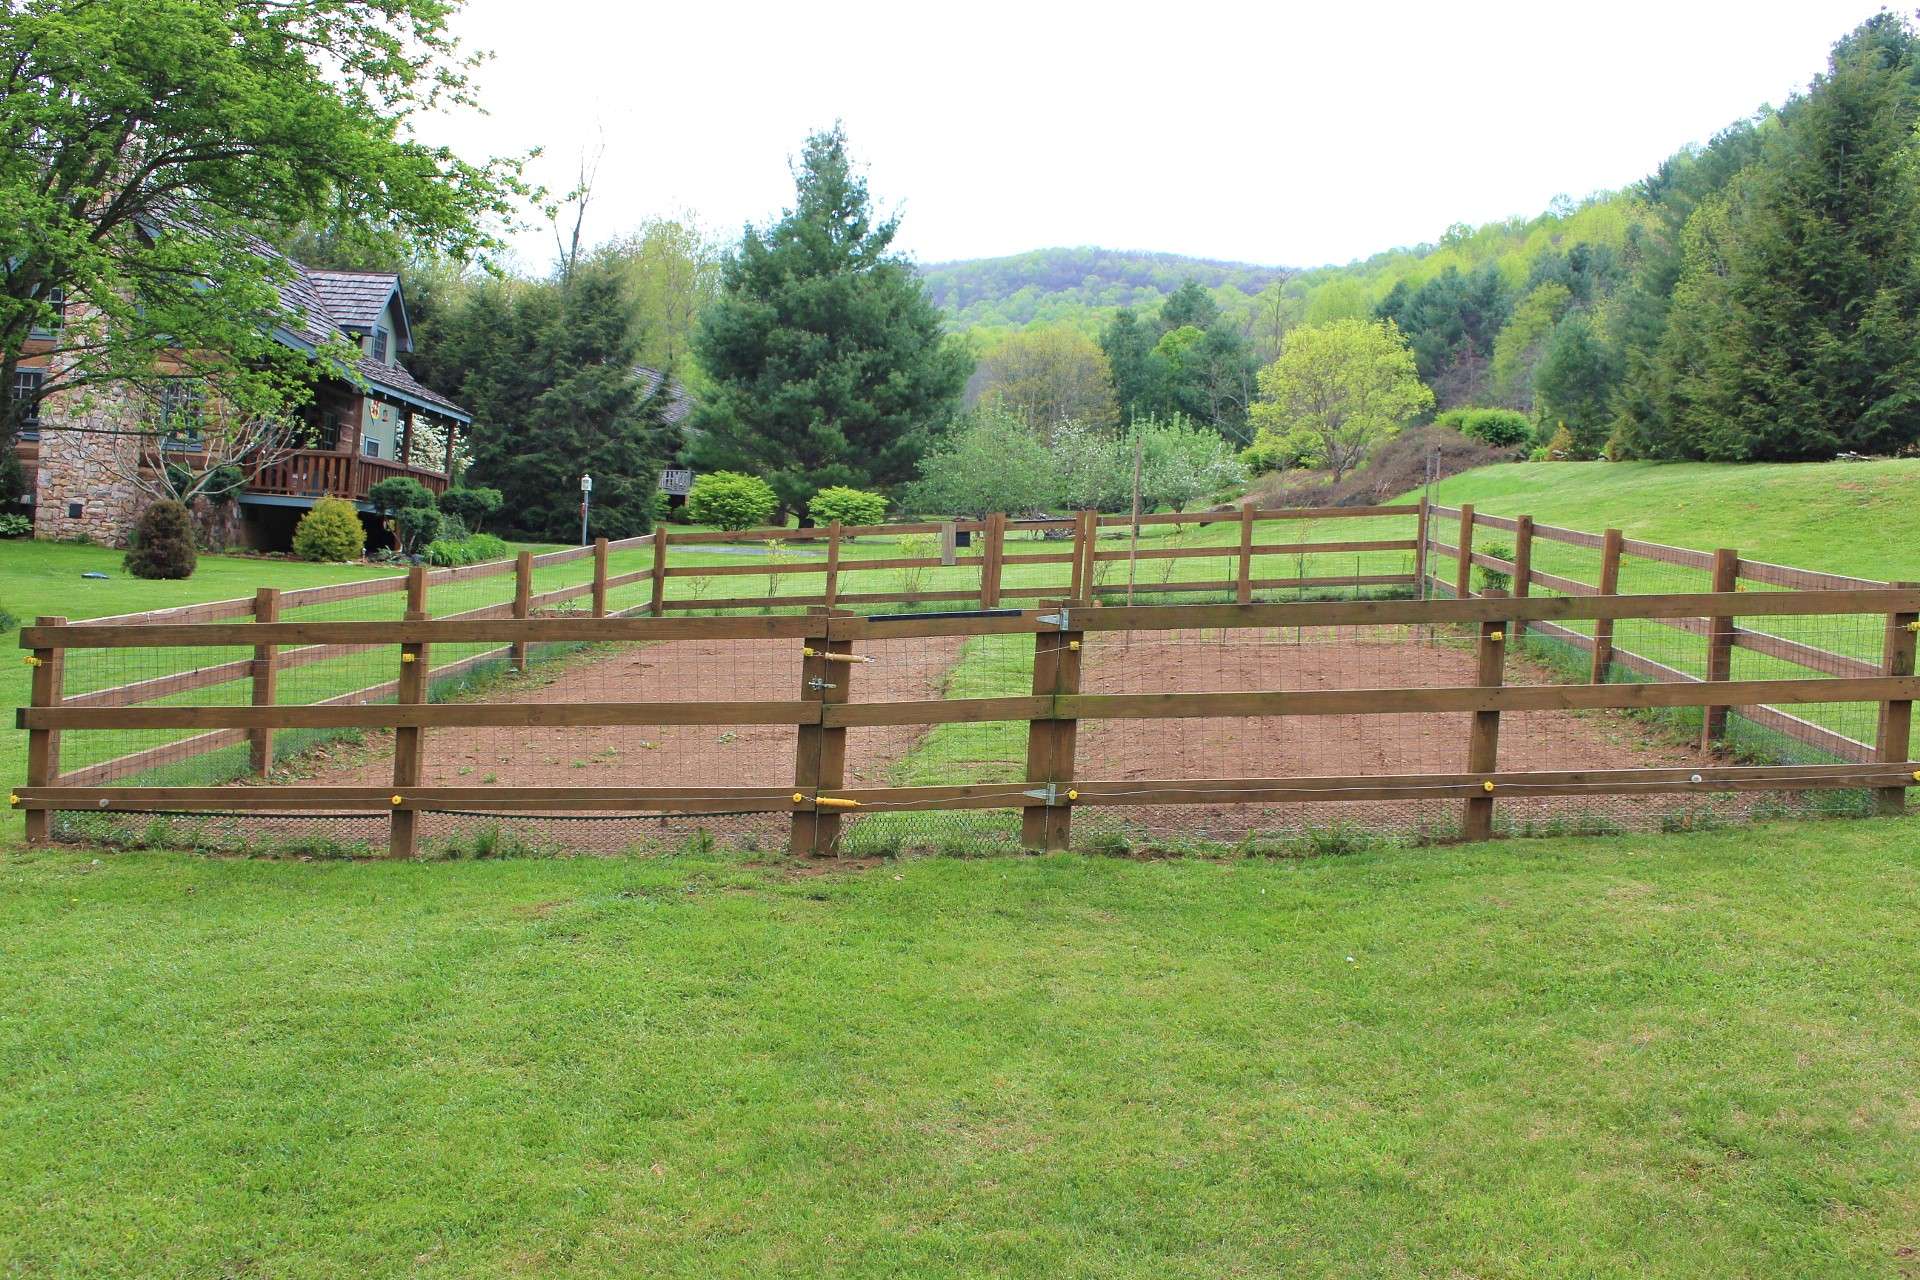 There is already a fenced garden area for your convenience.